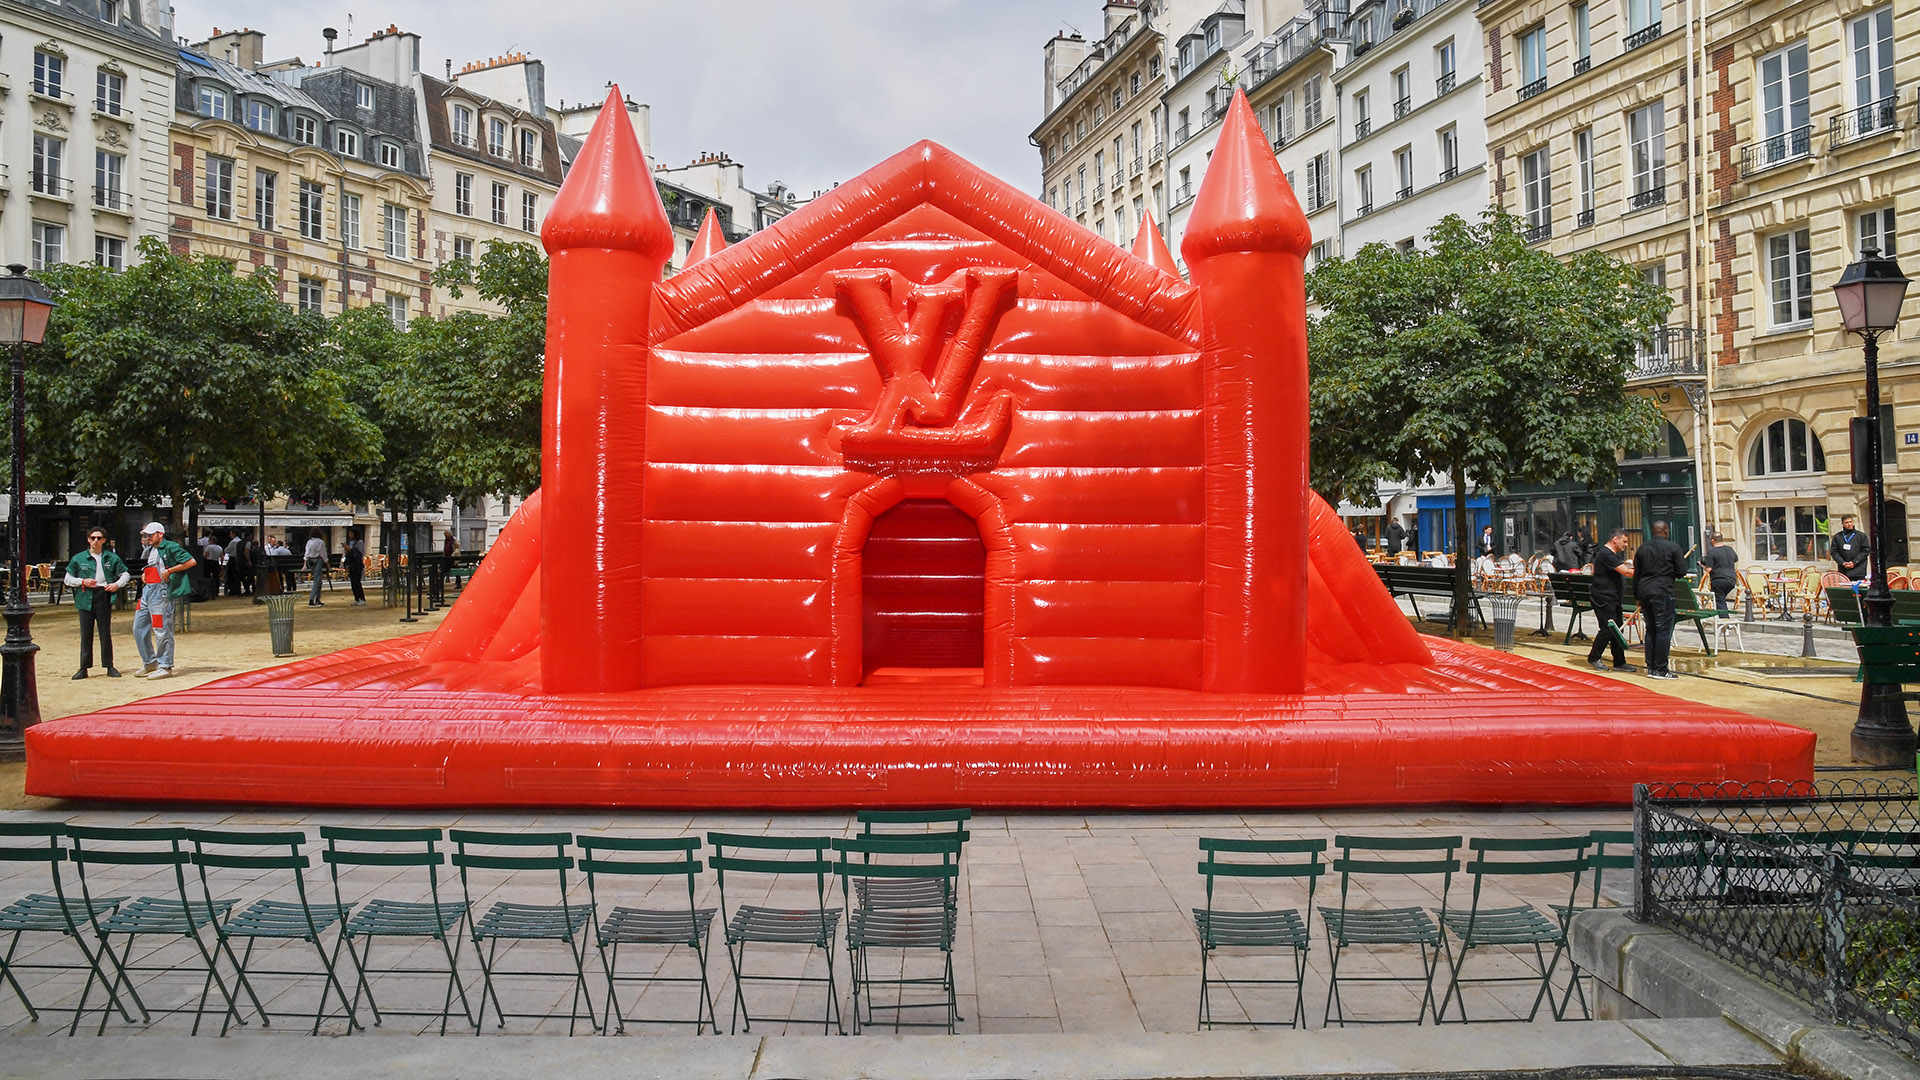 lv inflatable